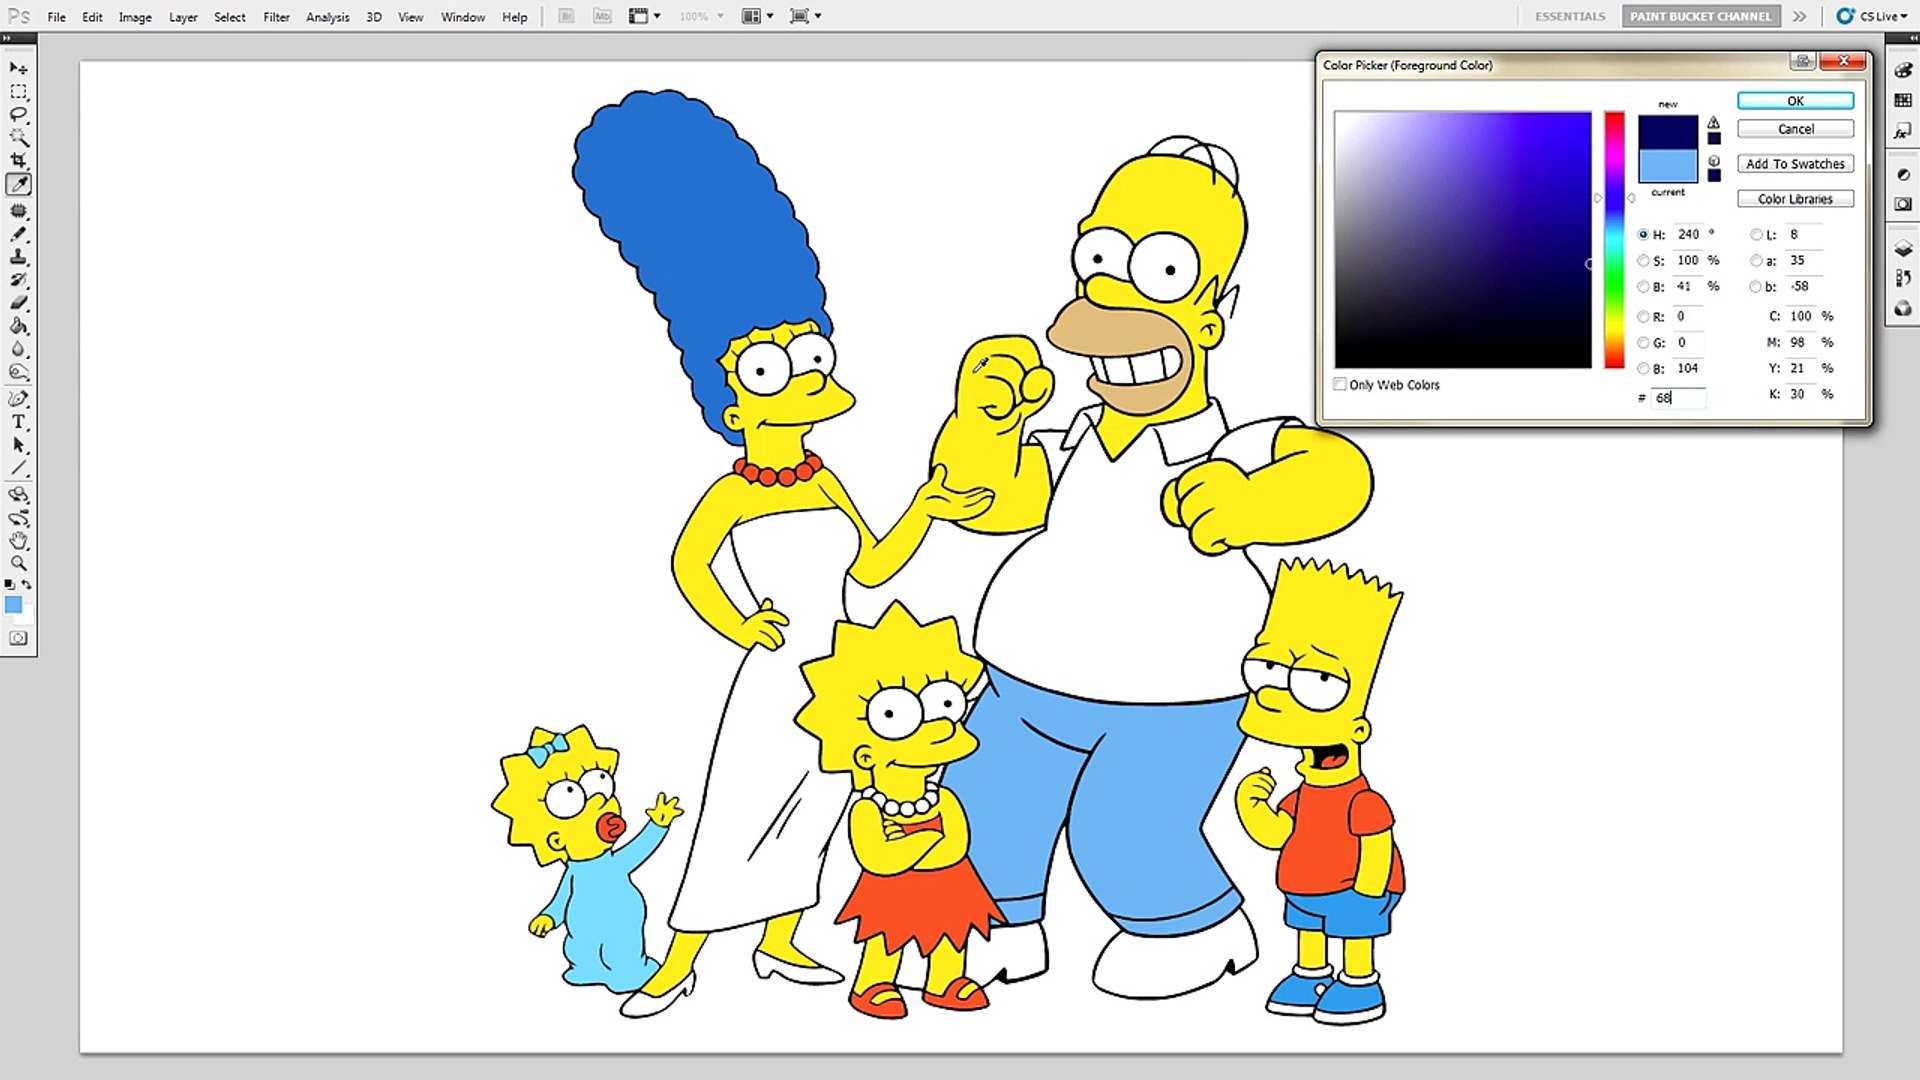 Coloring The Simpsons Matt Groening Tv Show Cartoon Coloring Page For Kids Video Dailymotion